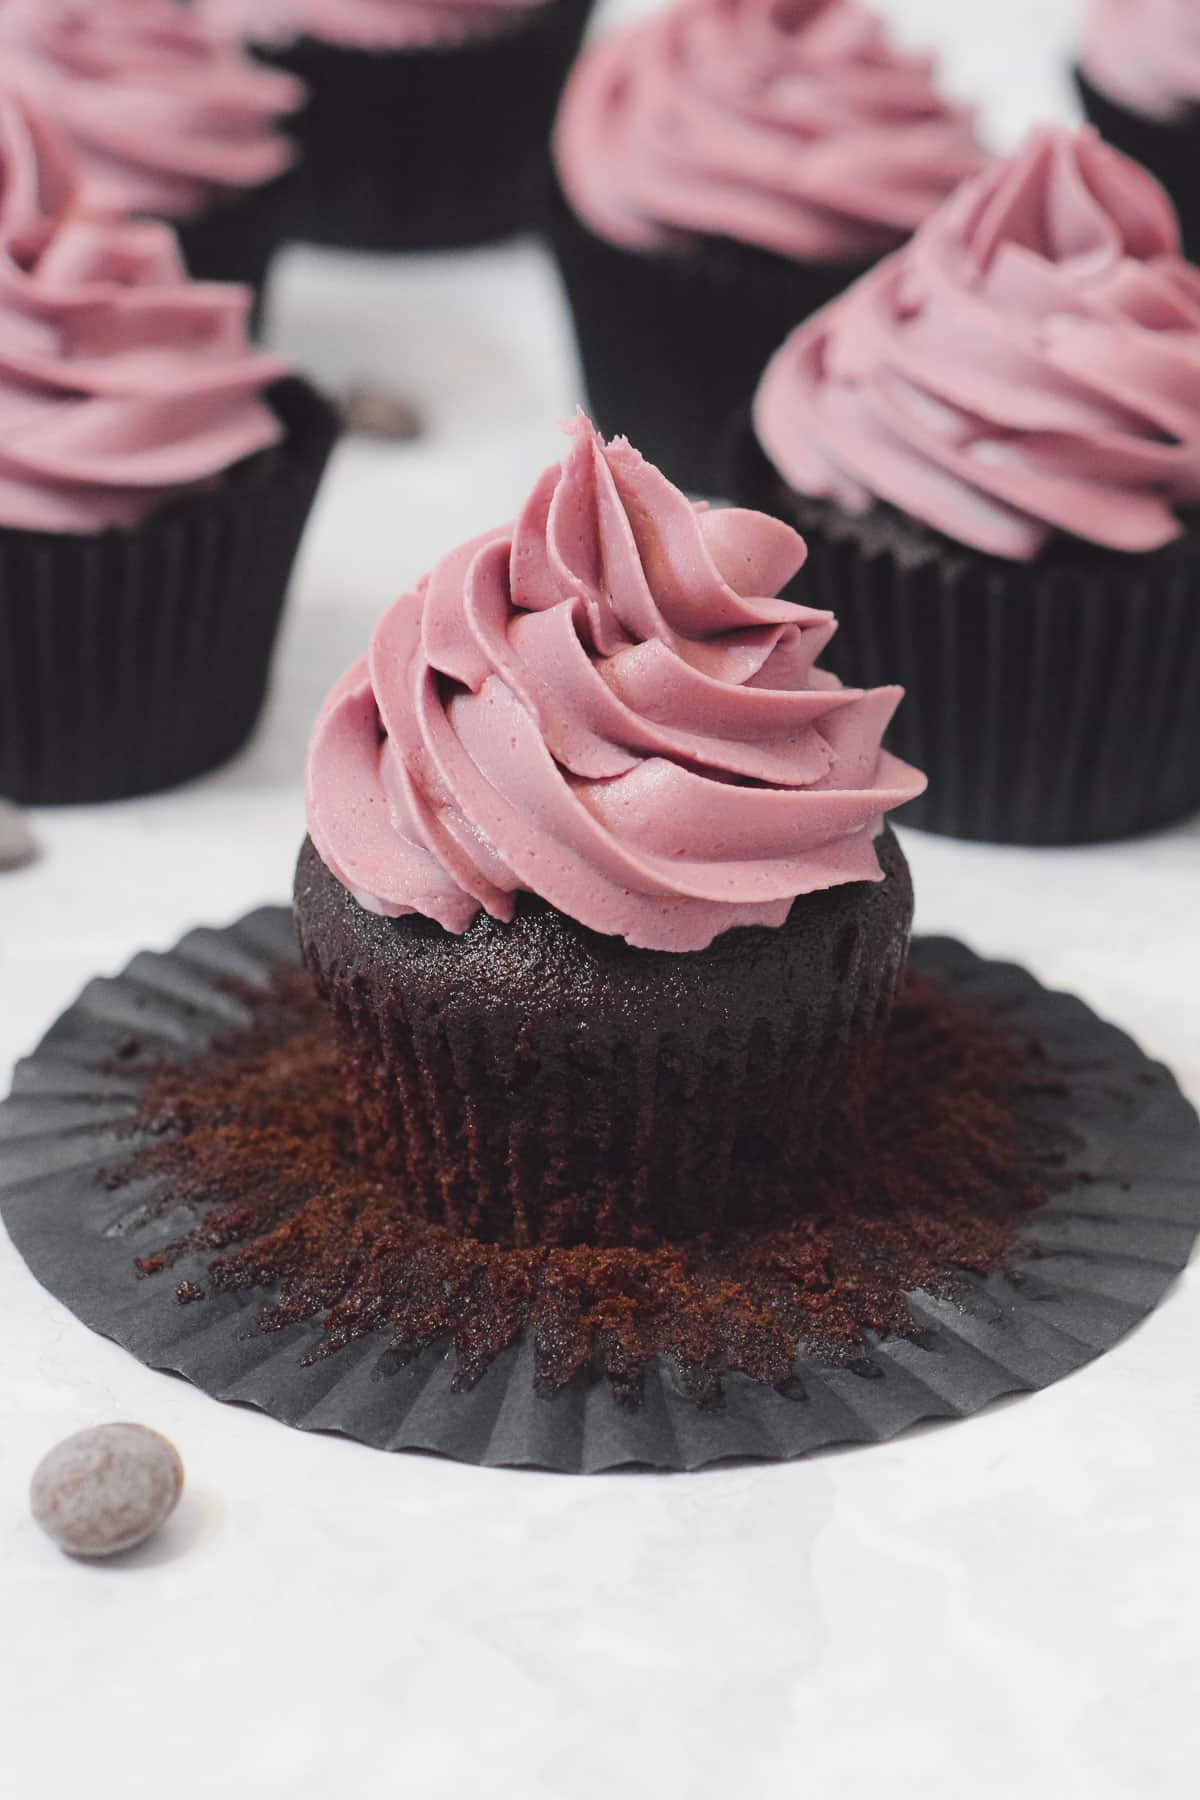 rich chocolate cupcakes with piped pink buttercream frosting swirl topping.